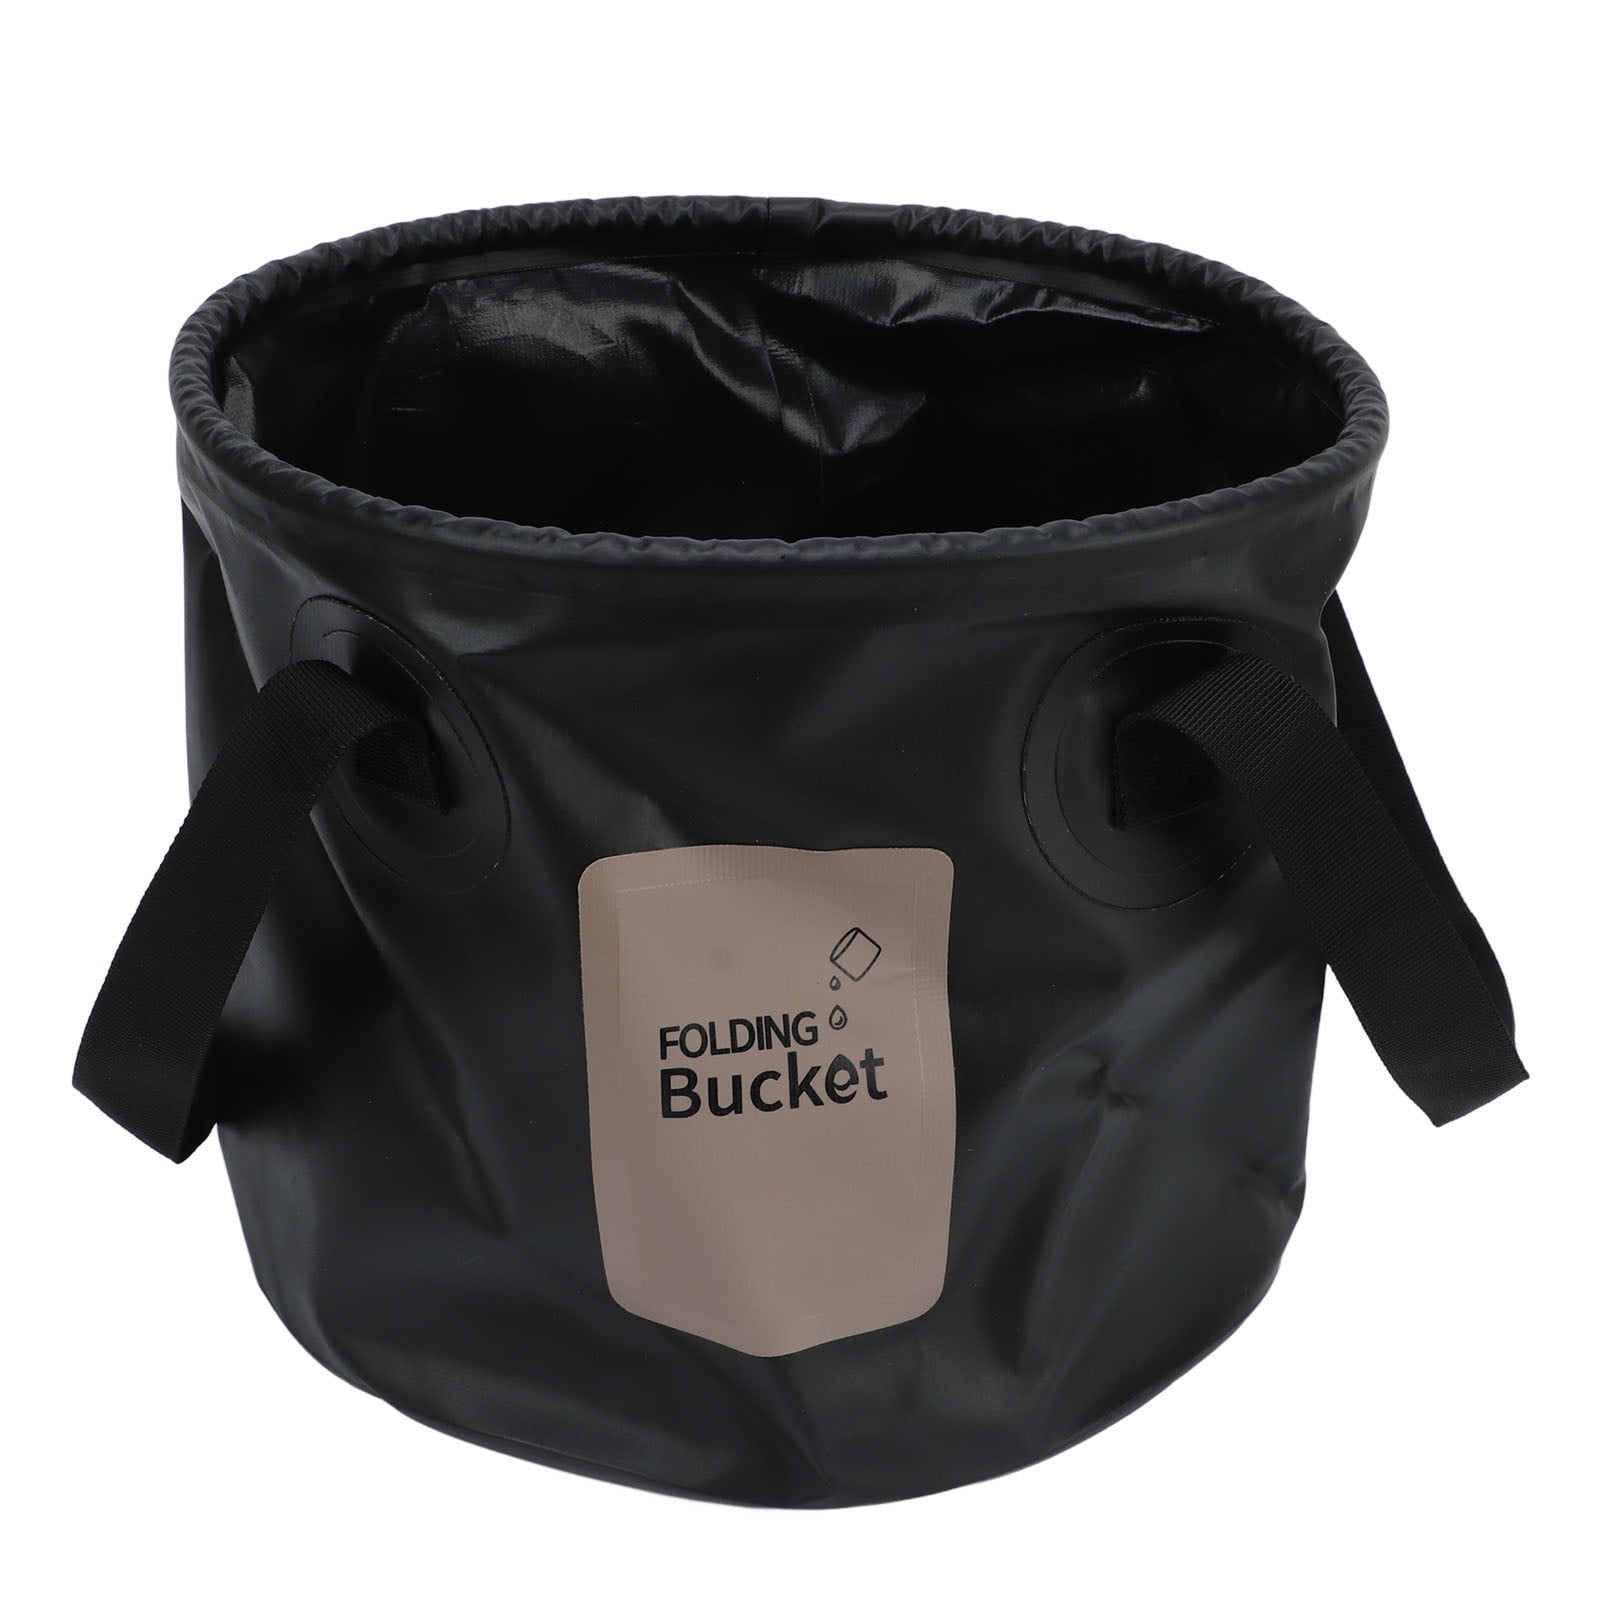  Collapsible Bucket 10L Square - Perfect for The Trailer,  Motorhome, Small Apartment, Camping, Boating, RV or Airstream,car Detailing  Supplies : Sports & Outdoors